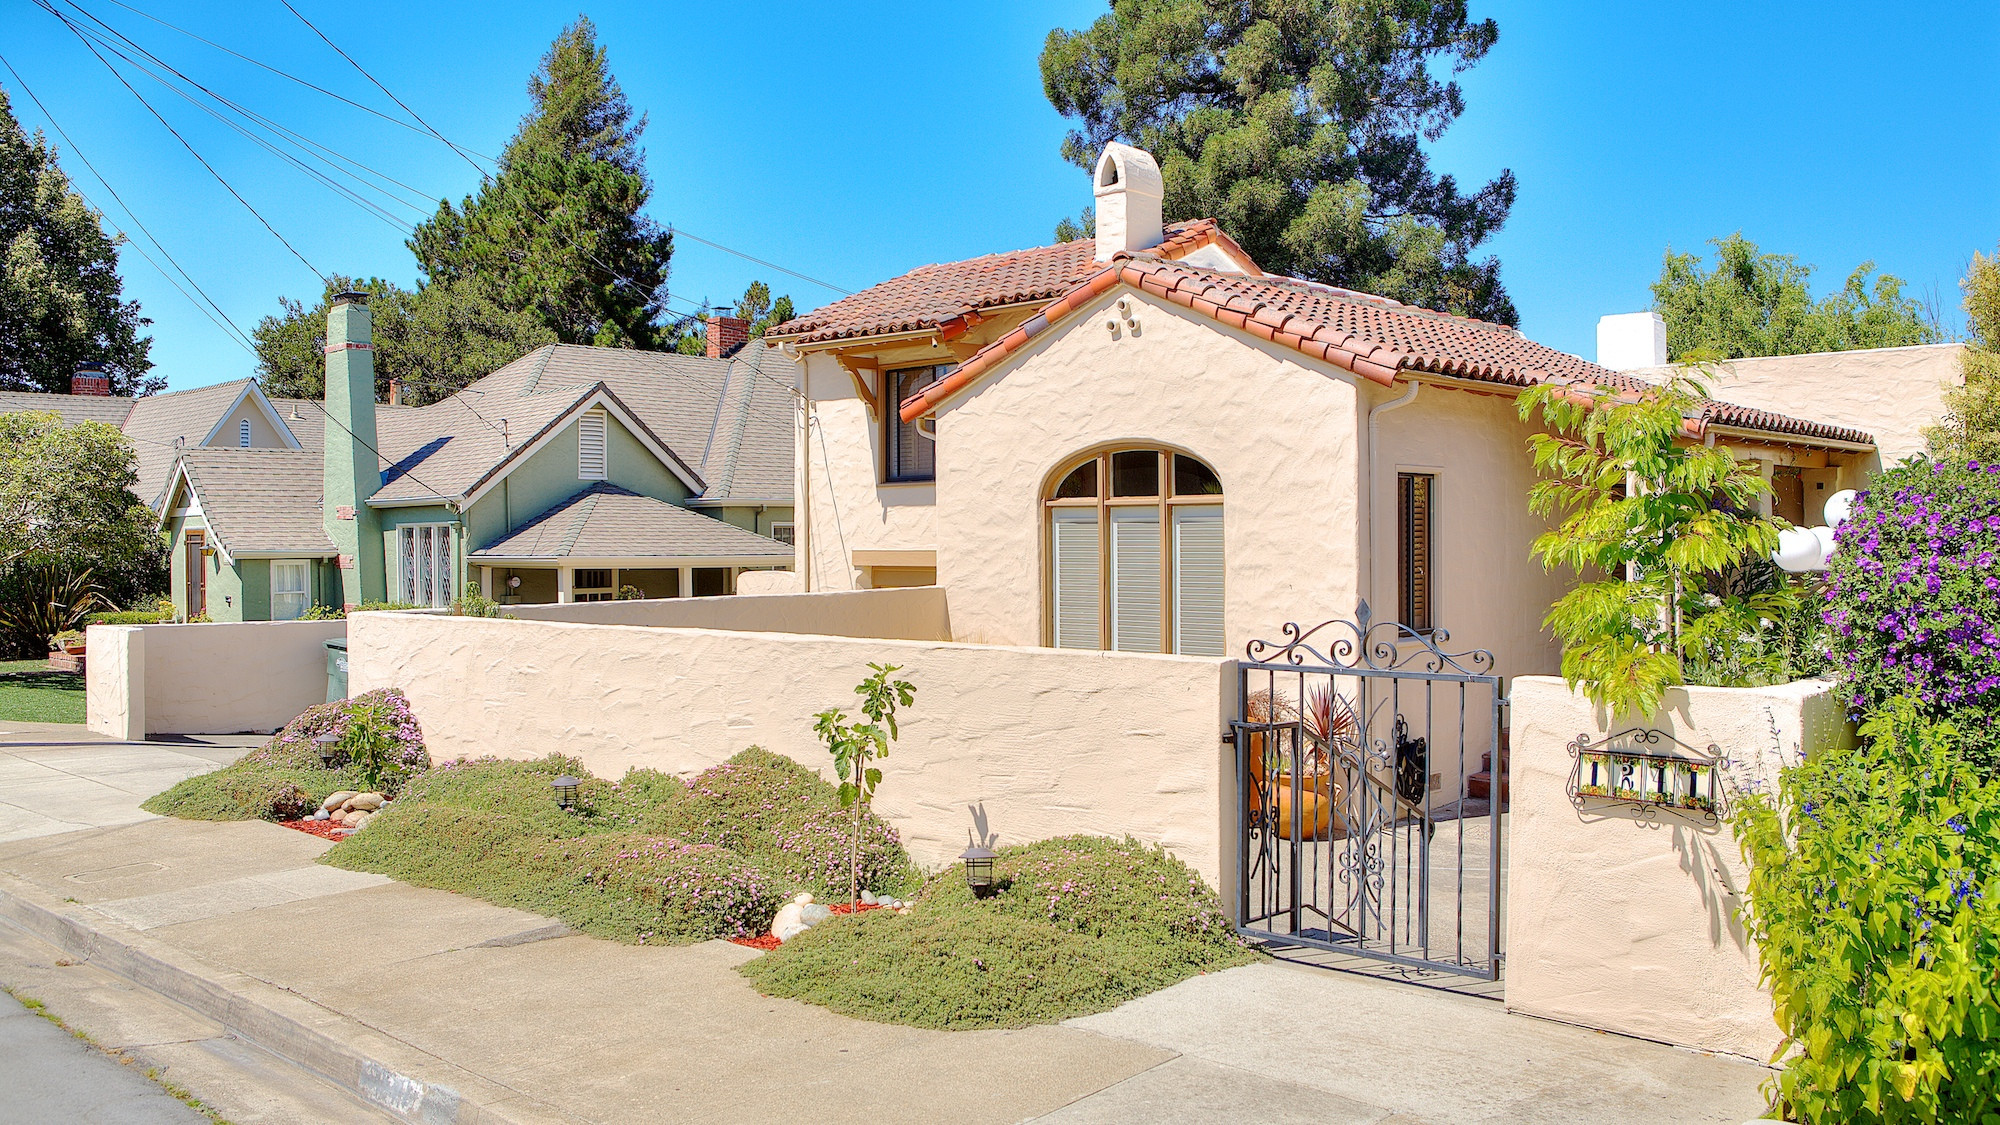 Spanish style home with concrete fence in San Mateo.